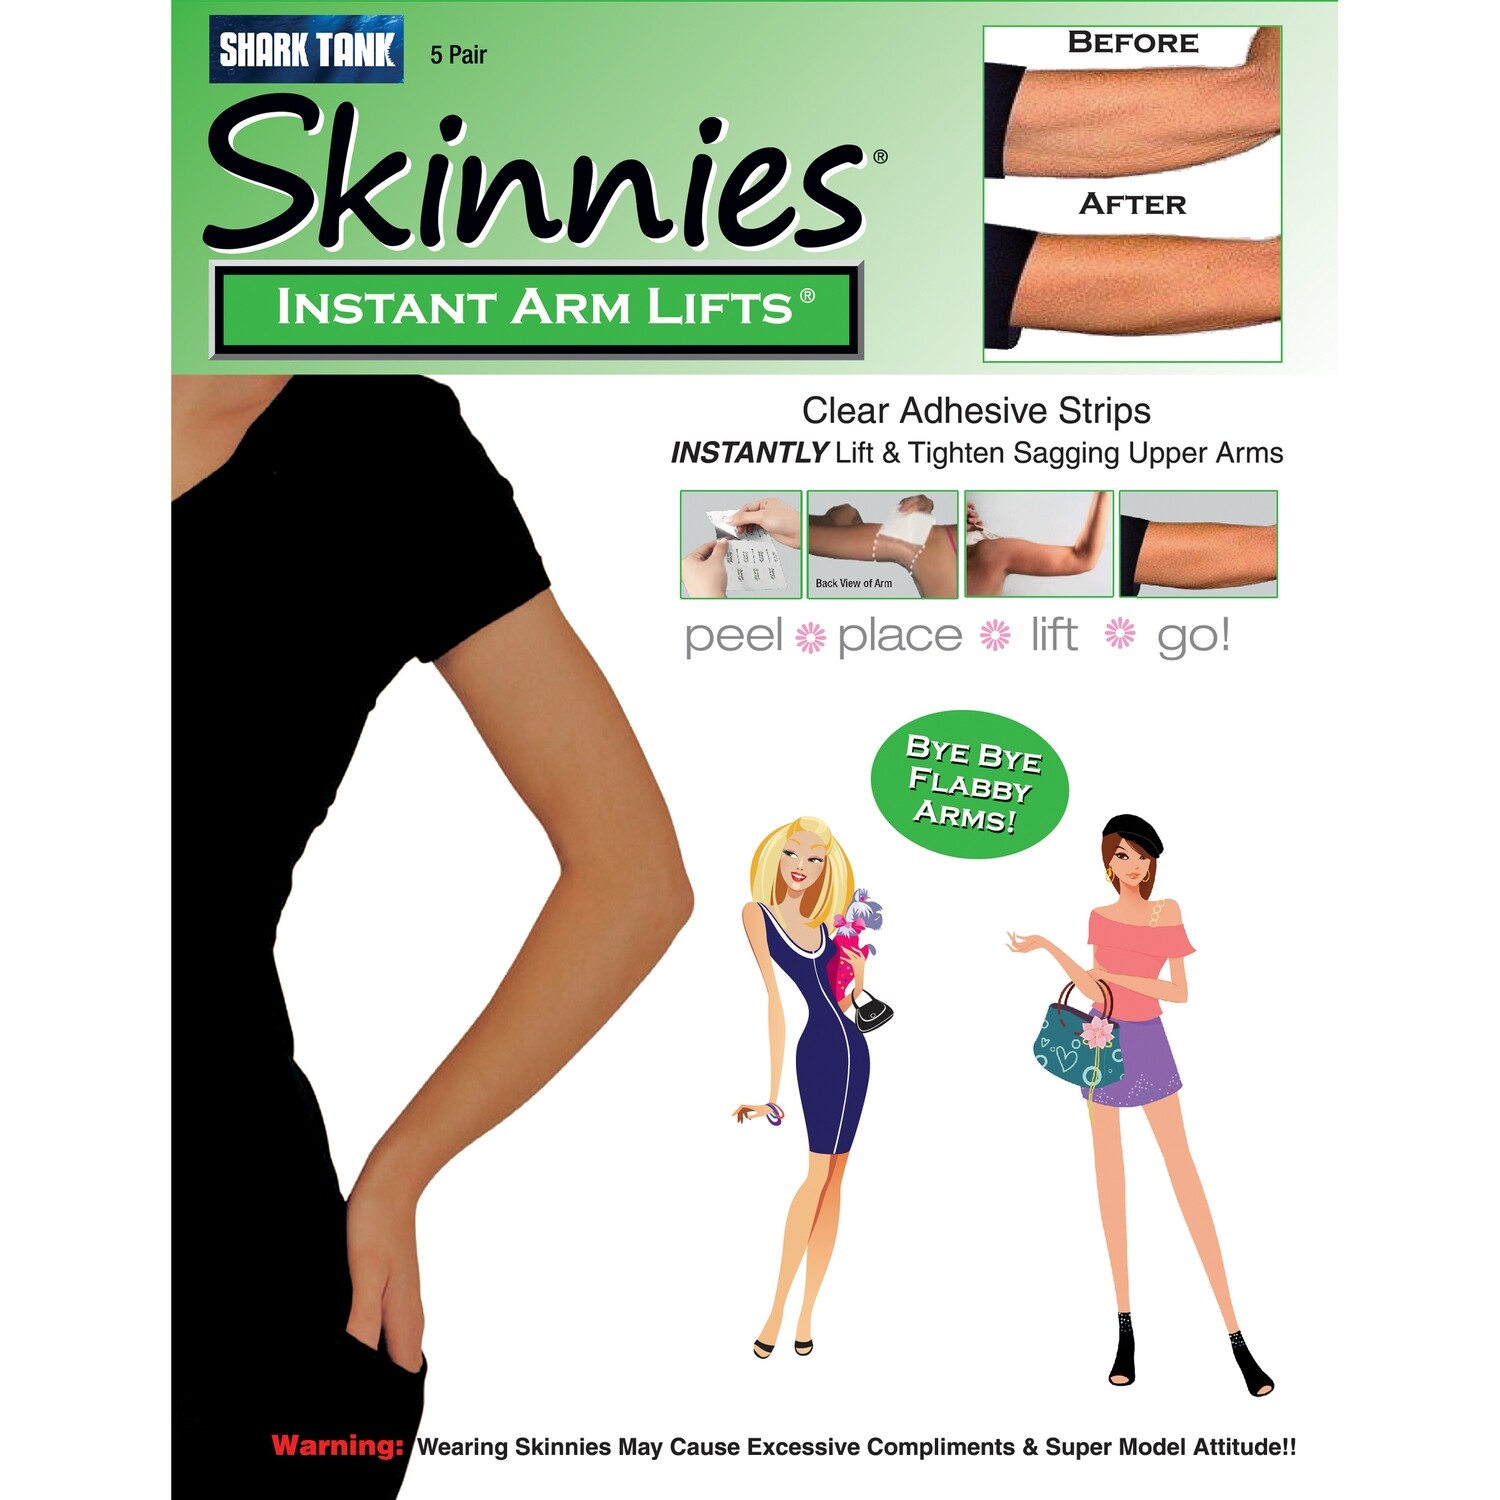 Skinnies Instant Arms Lift "Bye-Bye Flabby Arms!" (Need a Short Sleeve to Cover)